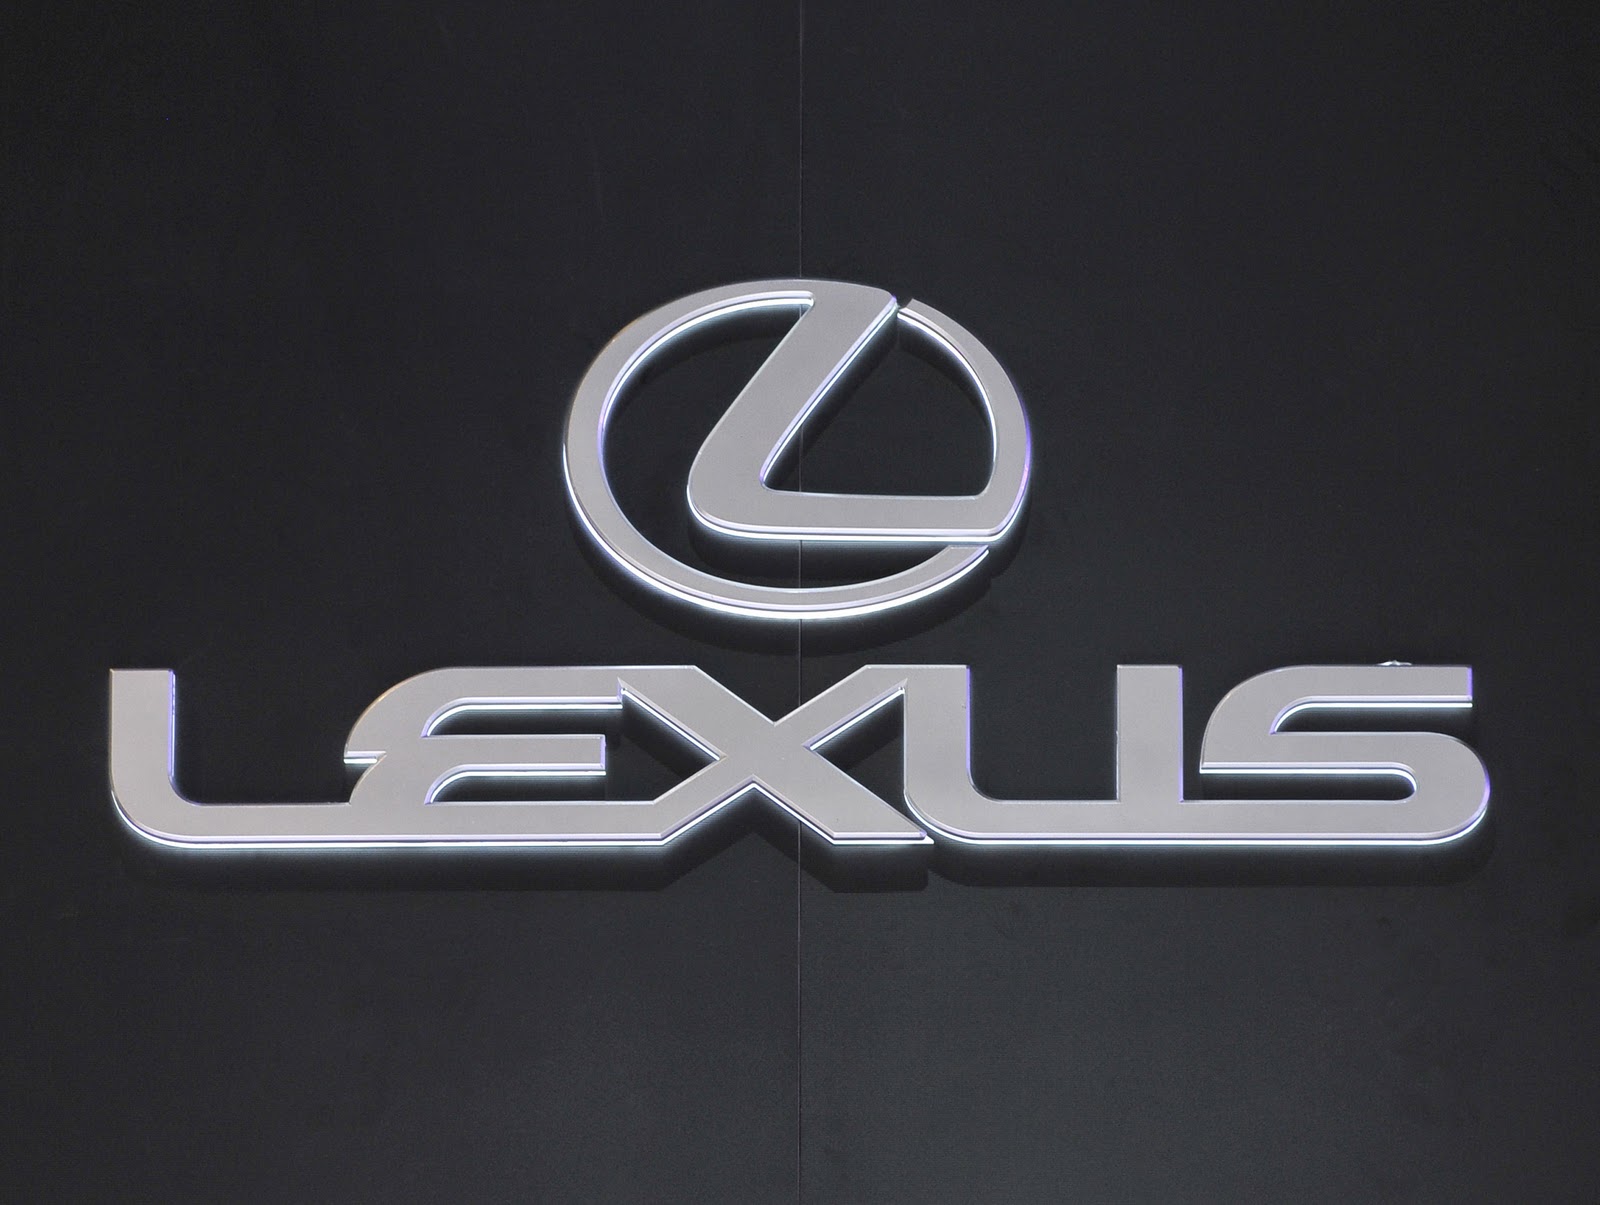 290 Lexus HD Wallpapers and Backgrounds